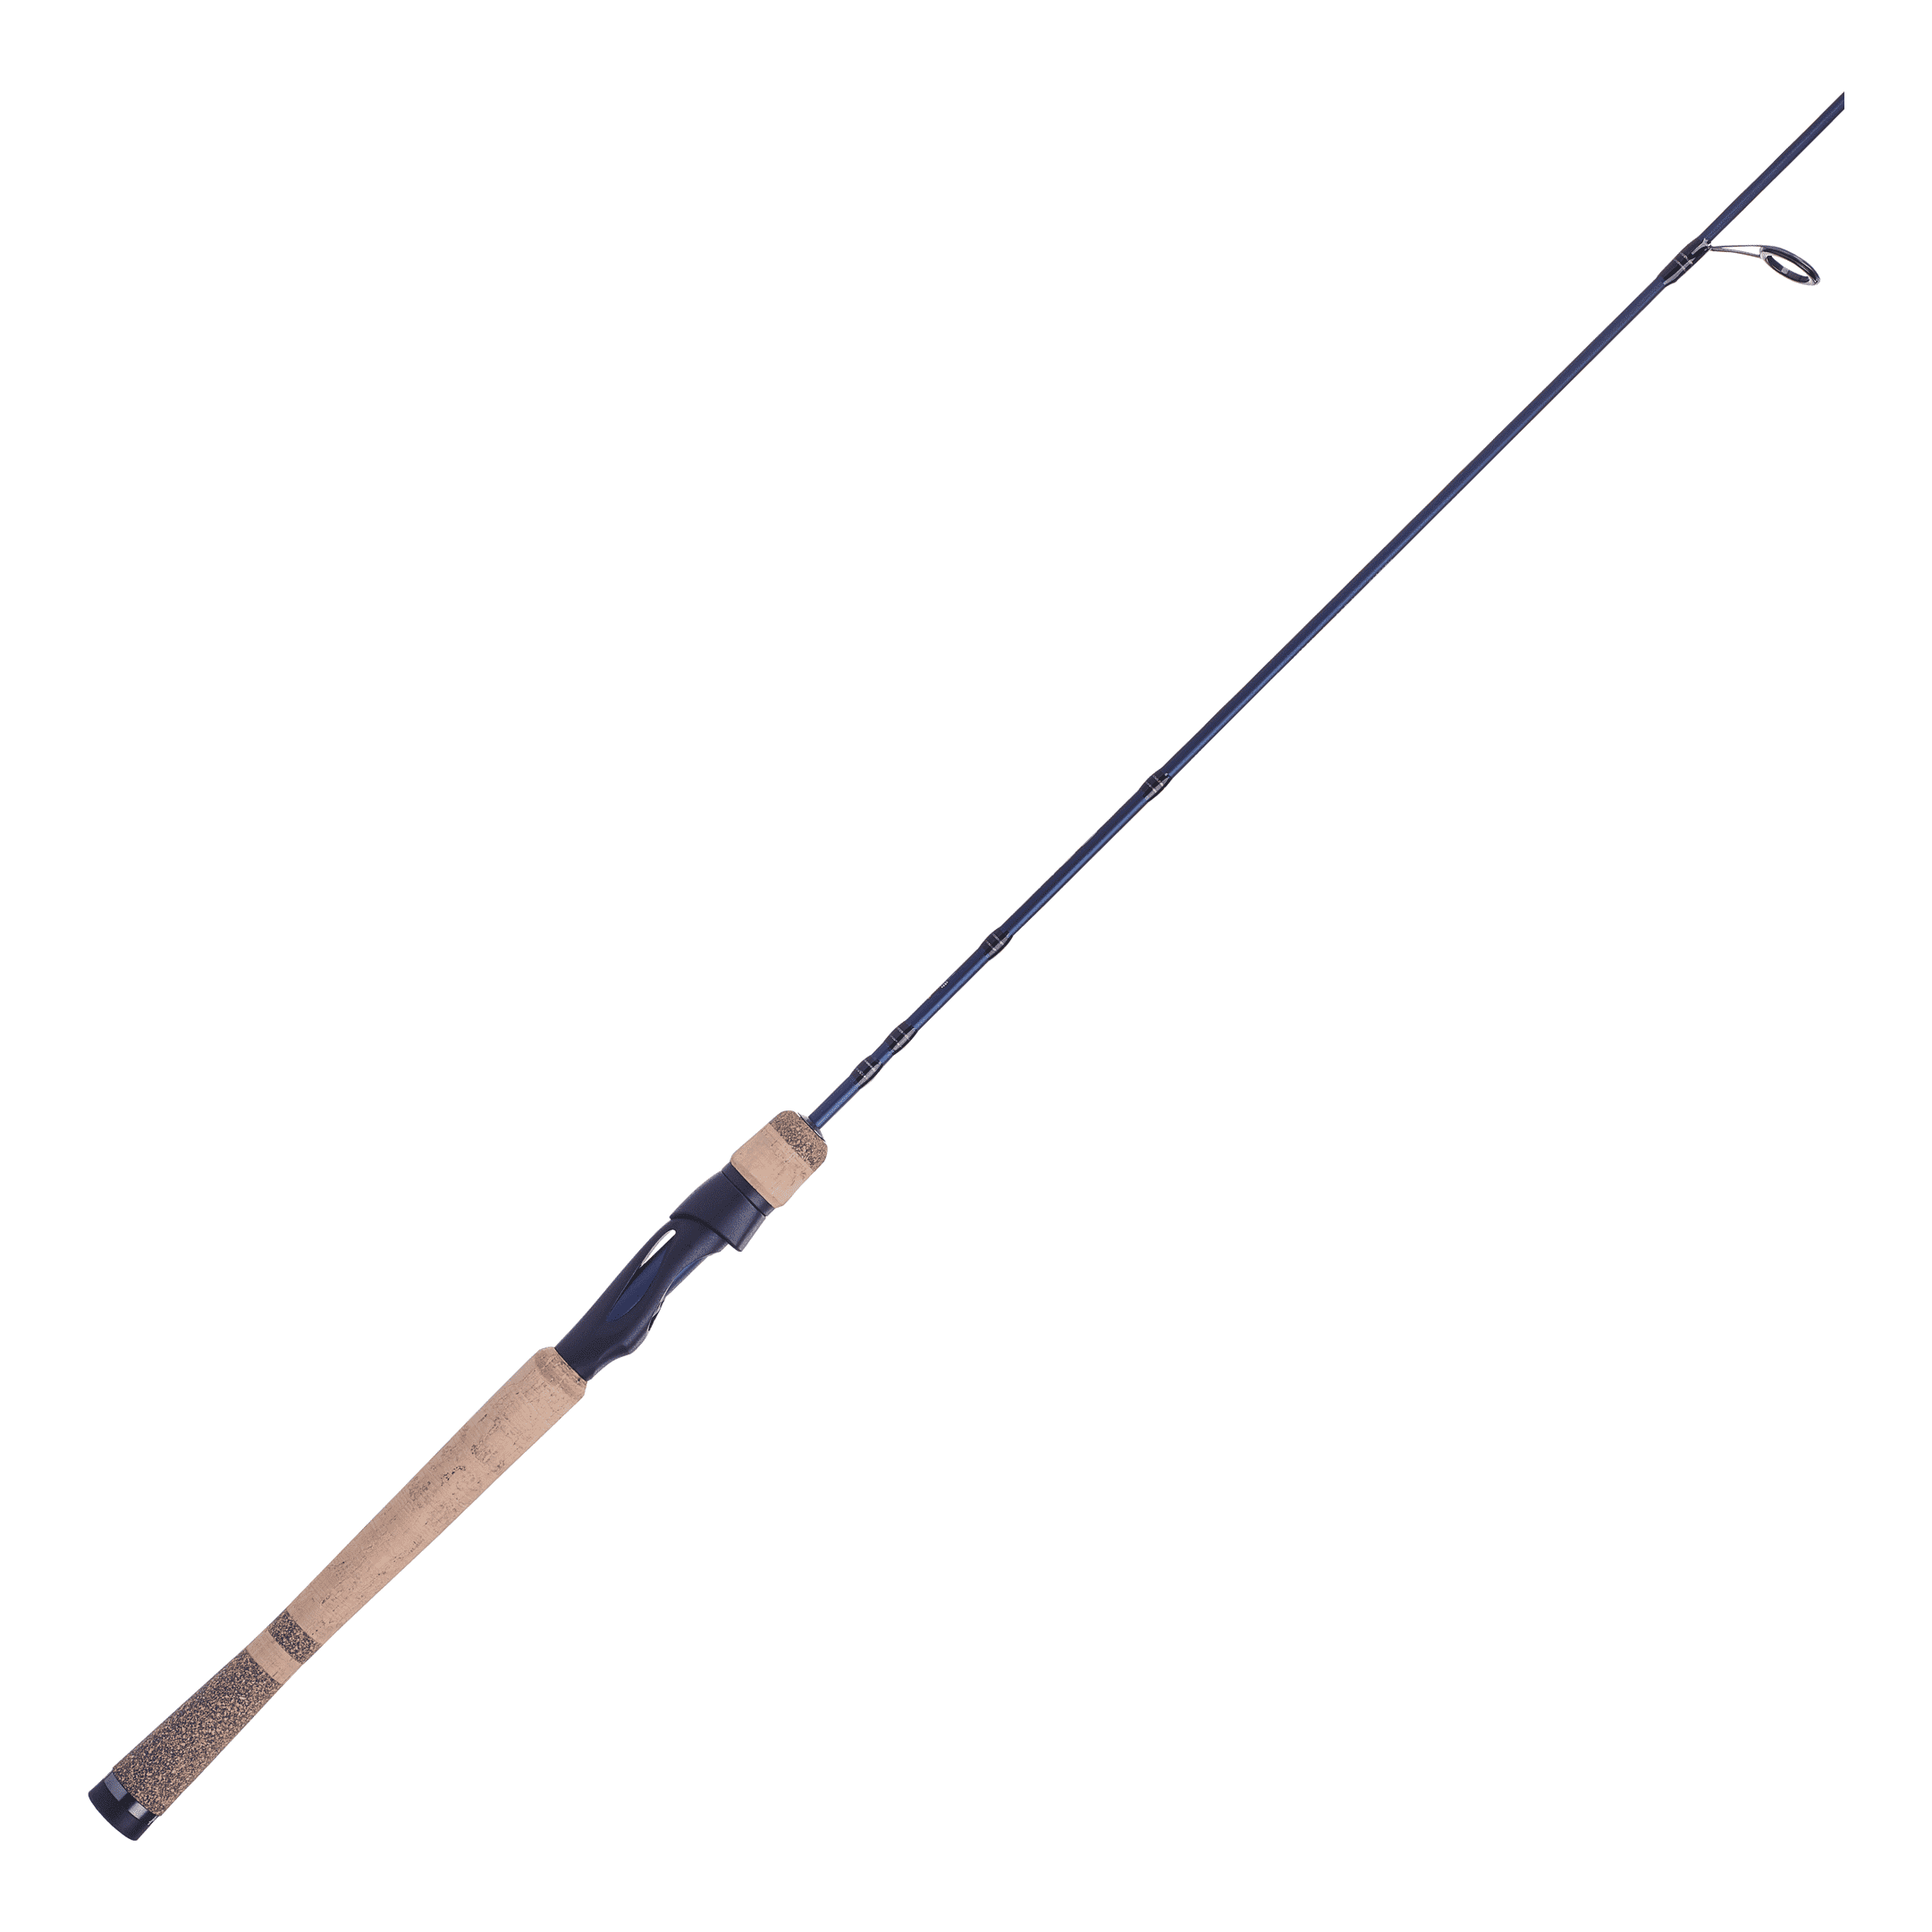 Fenwick Eagle Series Rods - Fishing Rod Review 